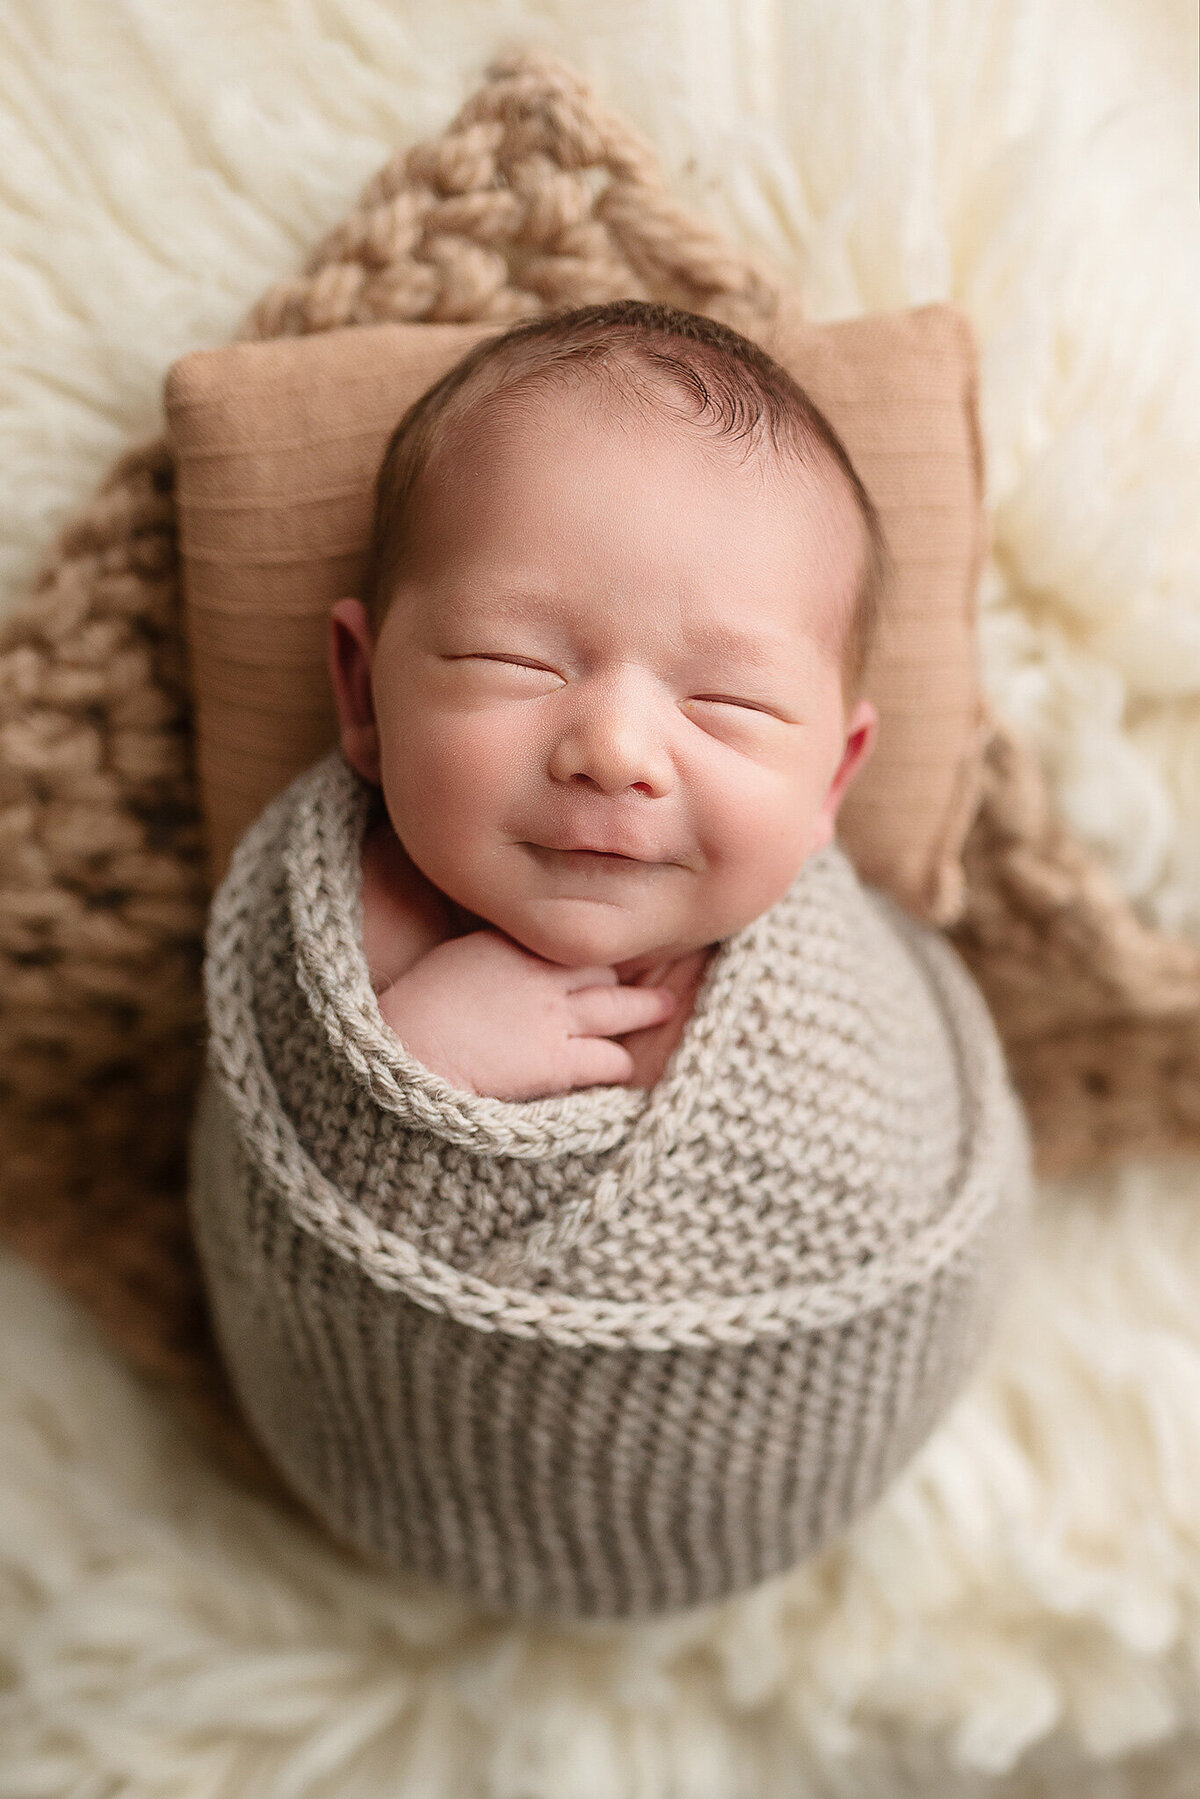 Wrapped newborn smiling during his newborn session at Jennifer Brandes Photography.